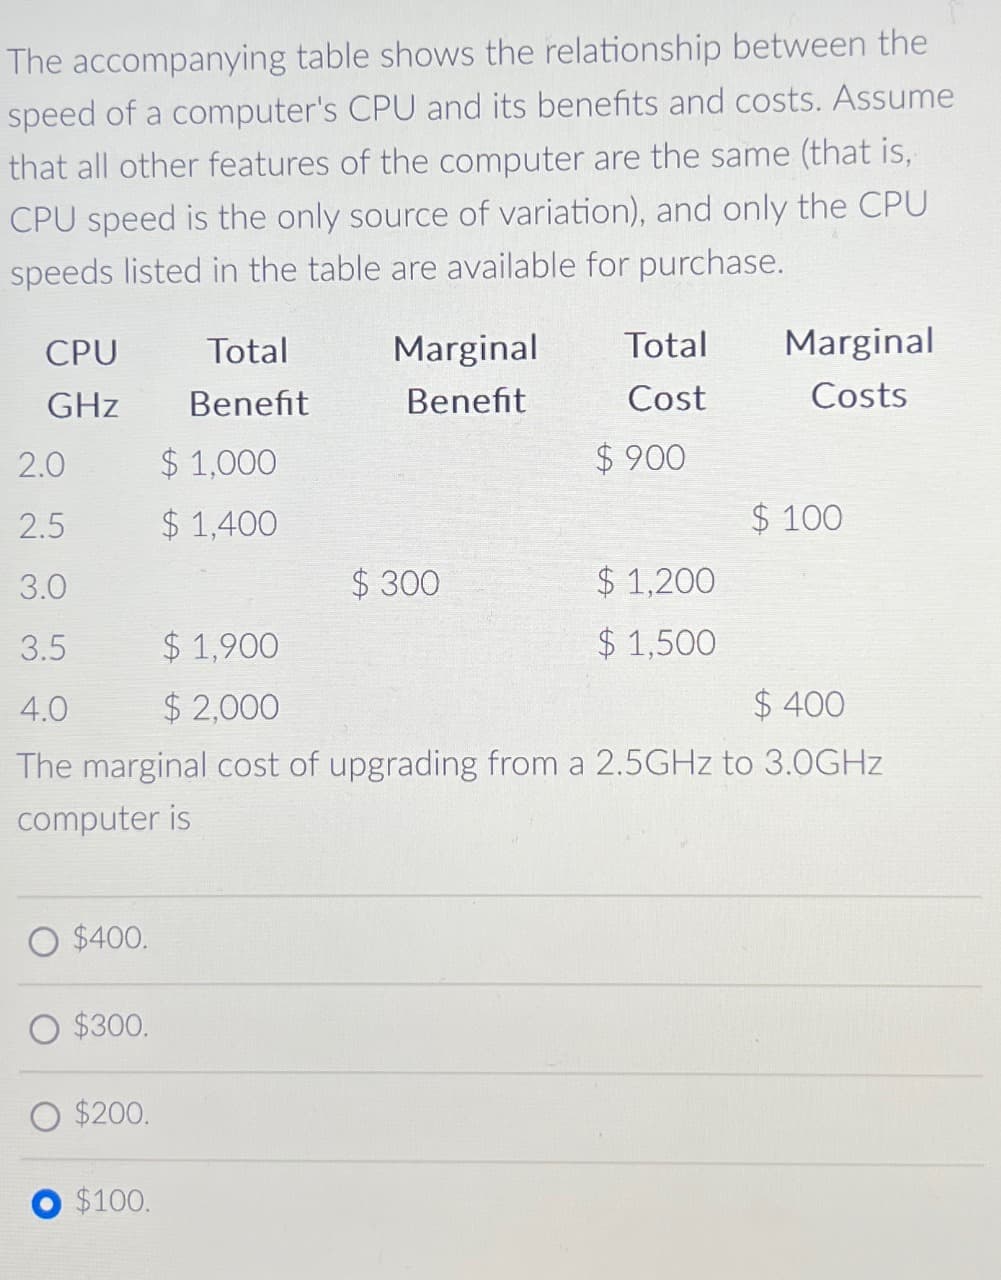 The accompanying table shows the relationship between the
speed of a computer's CPU and its benefits and costs. Assume
that all other features of the computer are the same (that is,
CPU speed is the only source of variation), and only the CPU
speeds listed in the table are available for purchase.
CPU
Total
Marginal
Total
Marginal
GHz
Benefit
Benefit
Cost
Costs
2.0
$1,000
$900
2.5
$1,400
$ 100
3.0
$300
$1,200
3.5
$1,900
$ 1,500
4.0
$2,000
$ 400
The marginal cost of upgrading from a 2.5GHz to 3.0GHz
computer is
O $400.
O $300.
$200.
O $100.